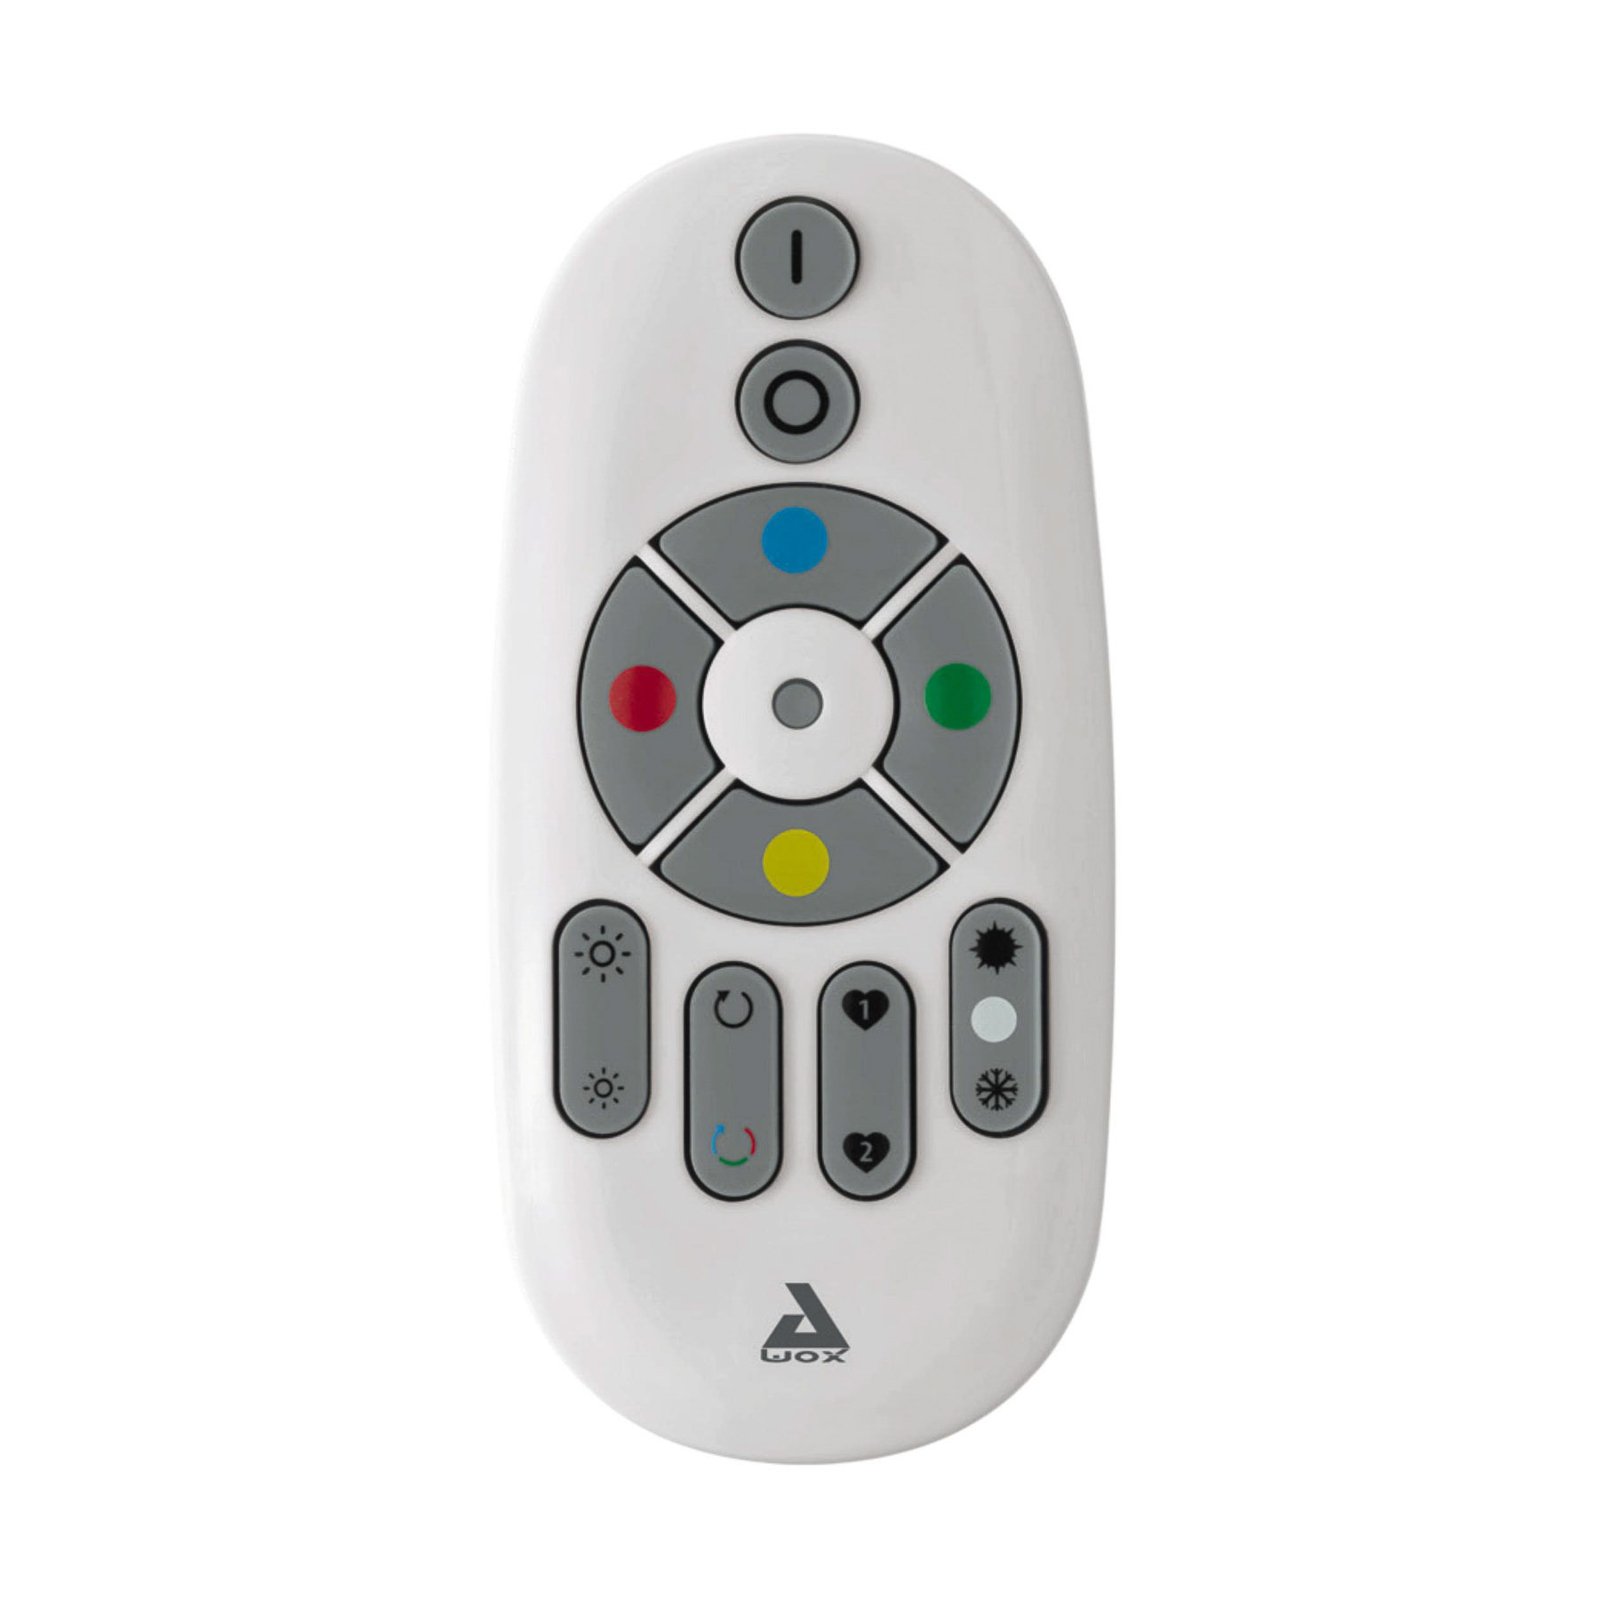 EGLO connect.z remote control with a wall mount